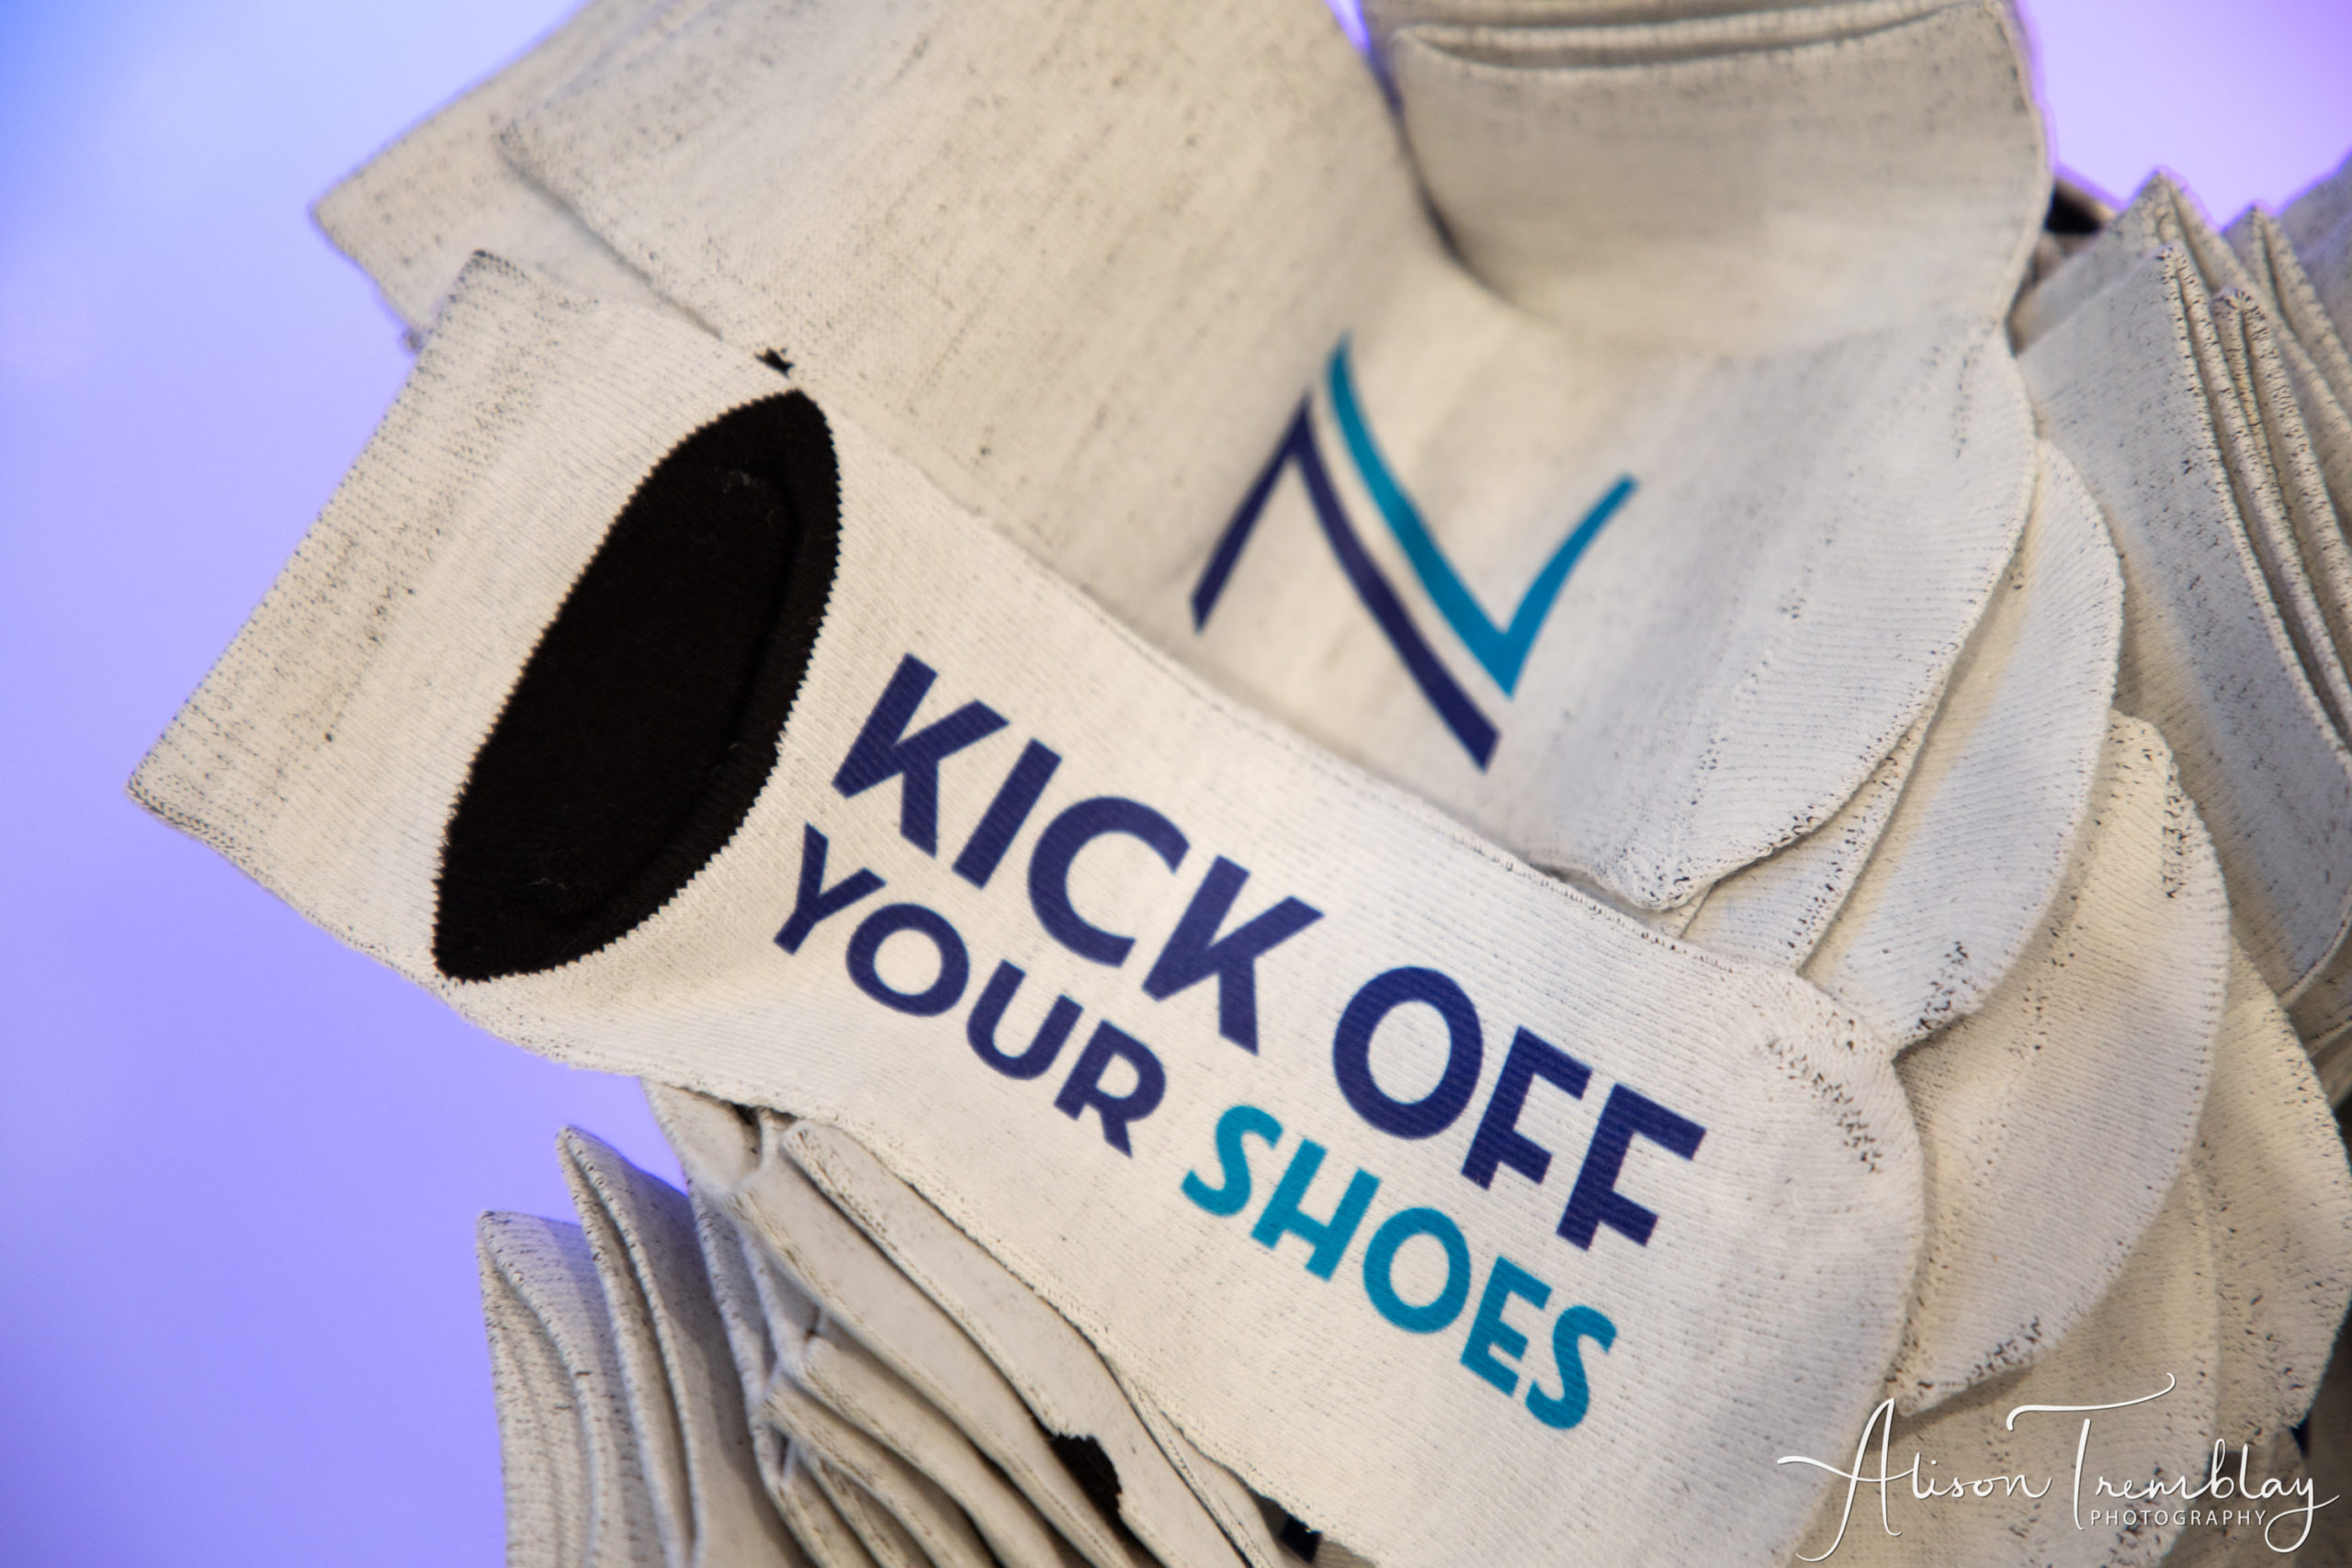 Kick off your shoes custom socks at Zoe's Purple and Teal Equestrian Bat Mitzvah at Canopy by Hilton Washington DC Bethesda North | Pop Color Events | Adding a Pop of Color to Bar & Bat Mitzvahs in DC, MD & VA | Photo by: Alison Tremblay Photography